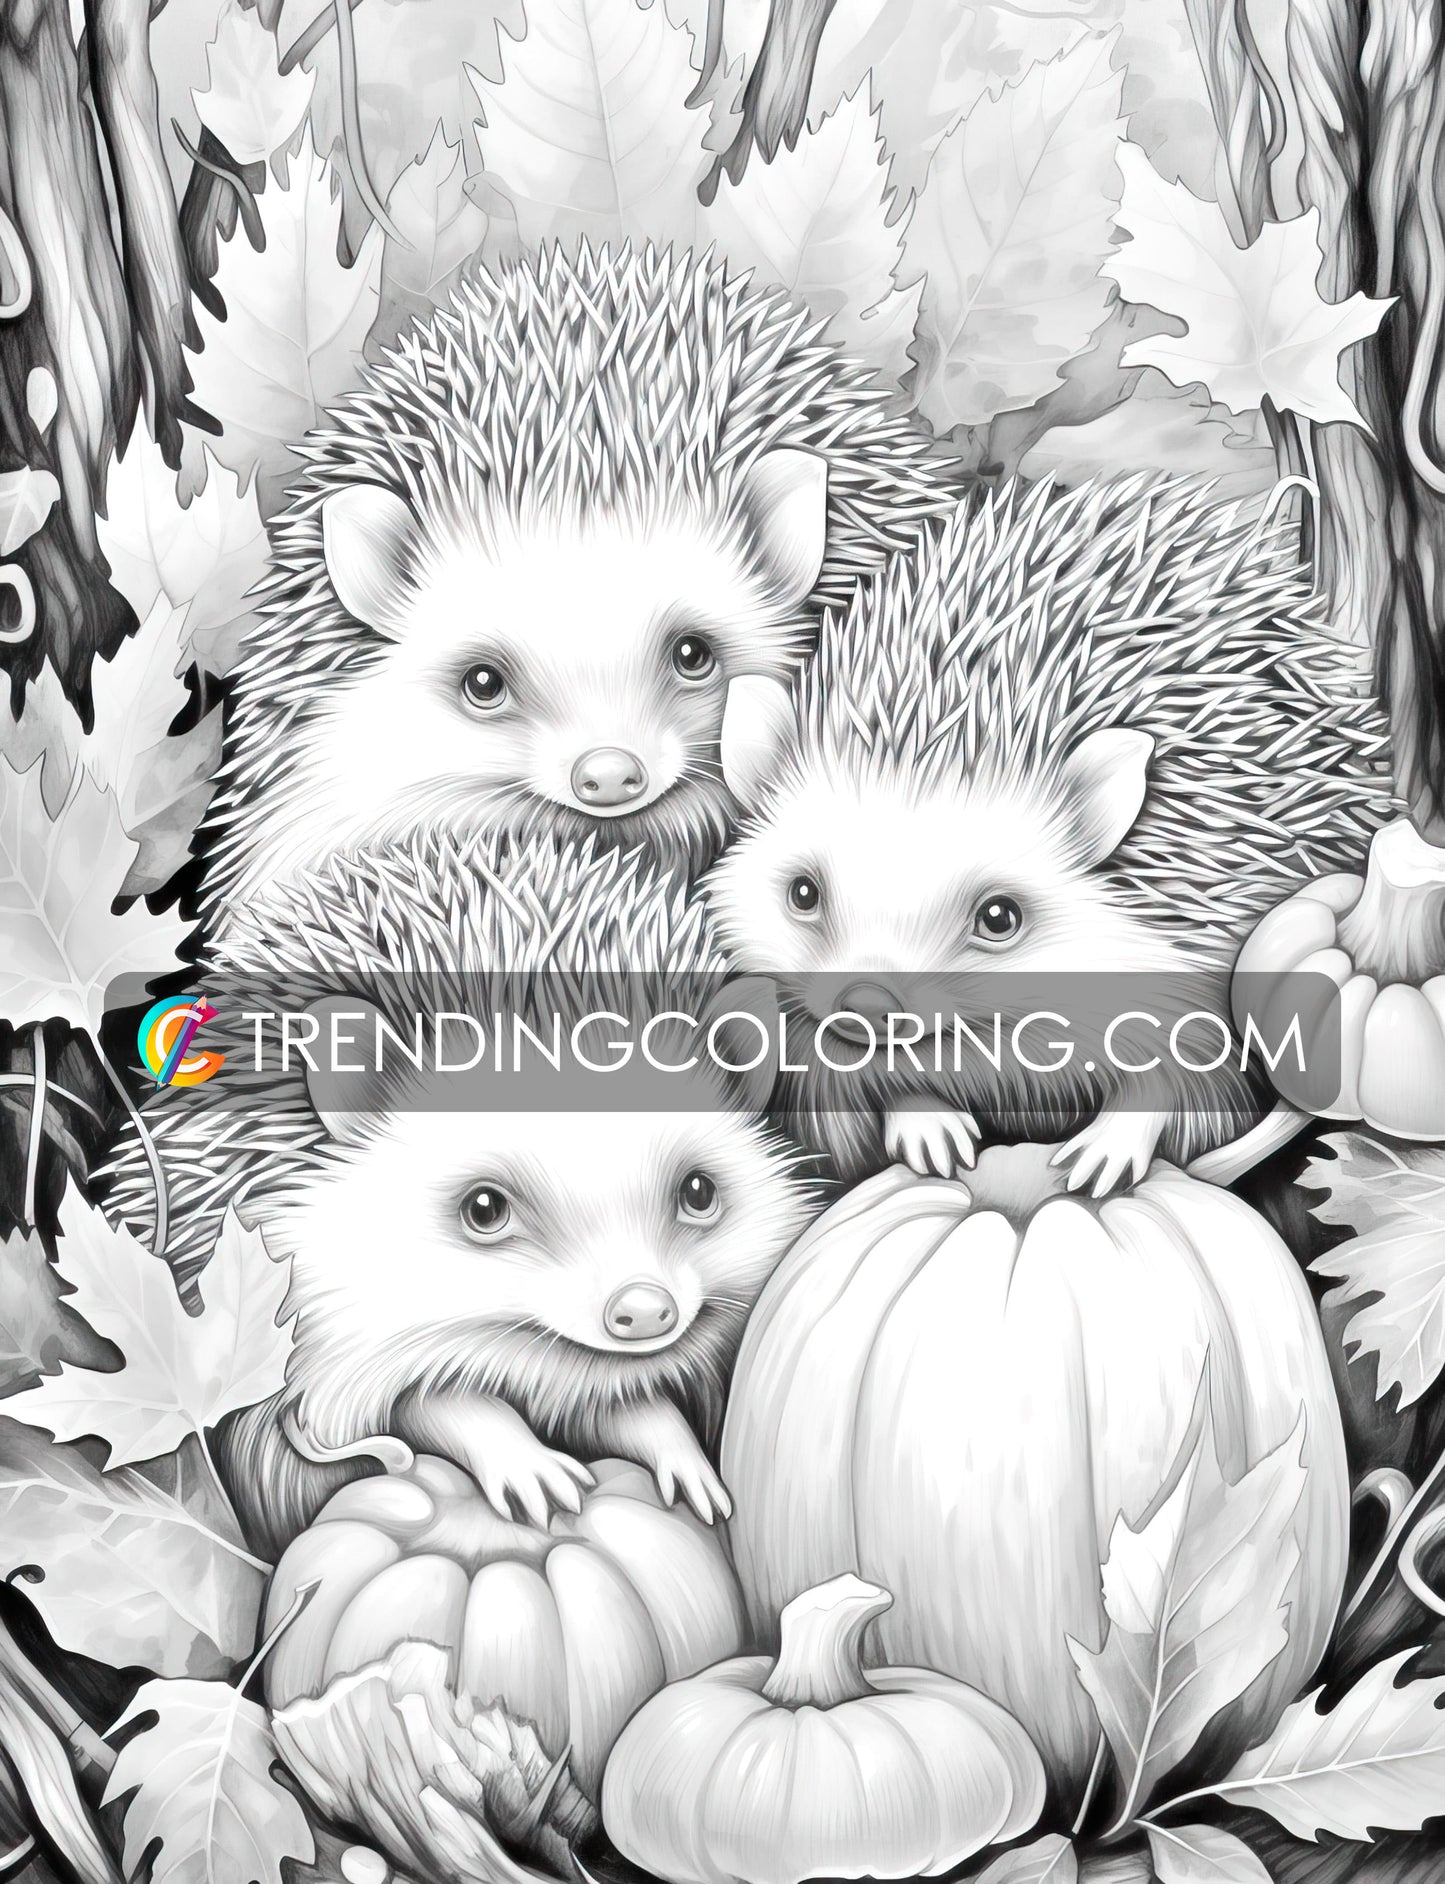 50 Autumn Critters Grayscale Coloring Pages - Instant Download - Printable PDF Dark/Light